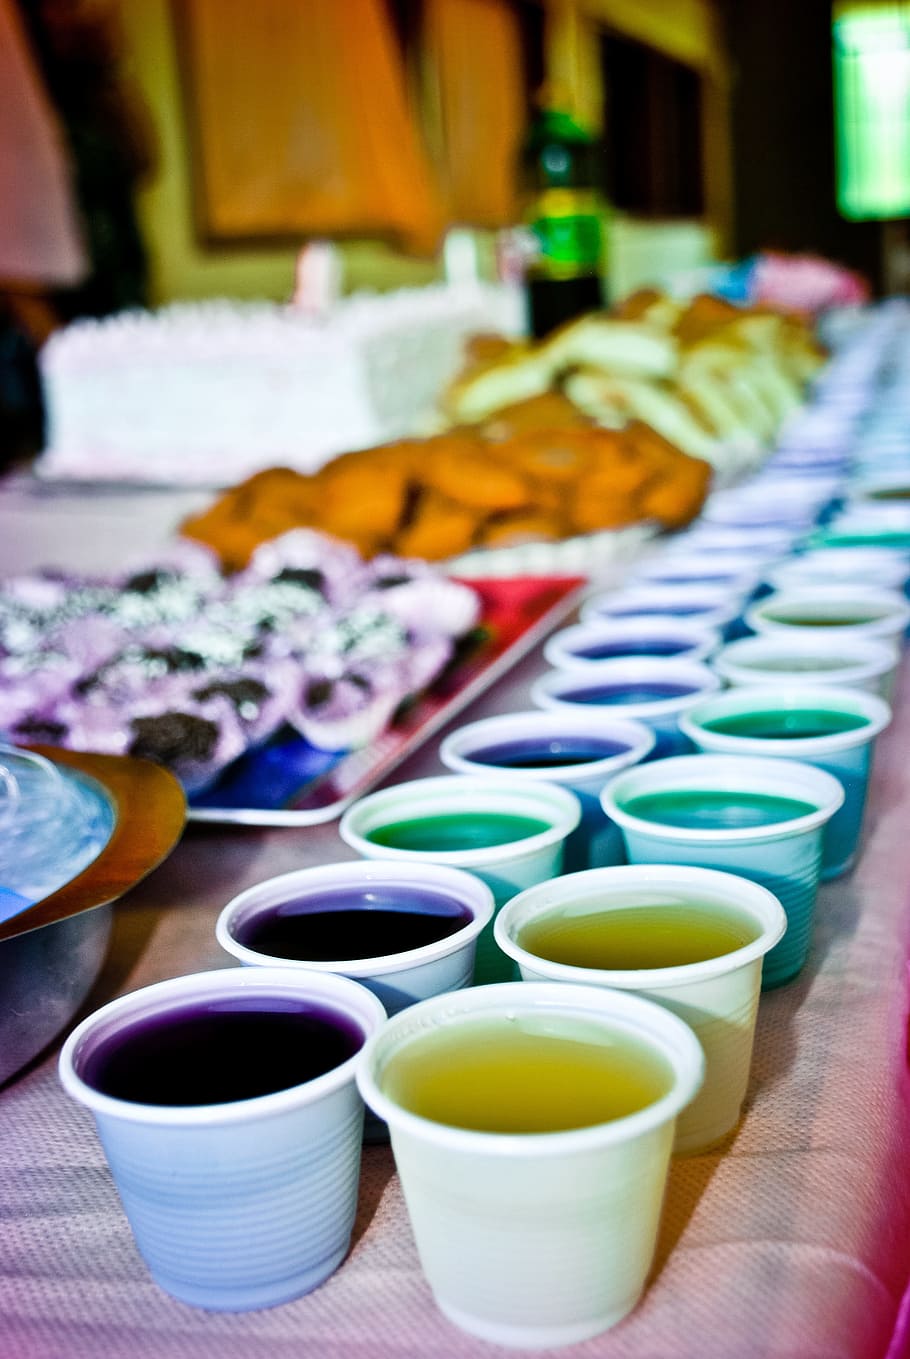 white plastic cups, food, birthday, party, gelatine, colorful, in a row, table, cup, multi colored